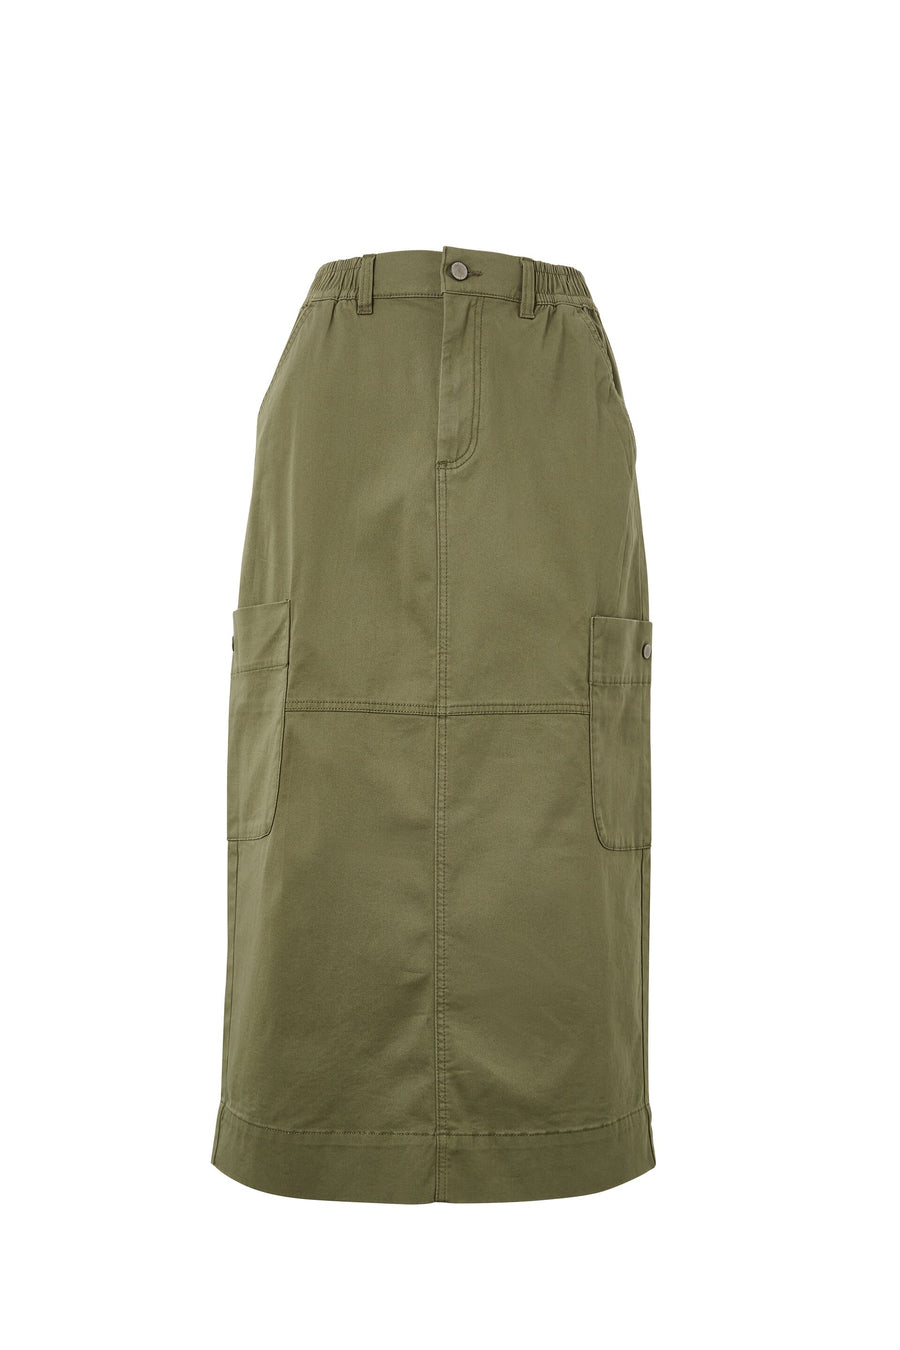 Ceres Life - Utility Midi Skirt - Soft Olive Rescued Fabric